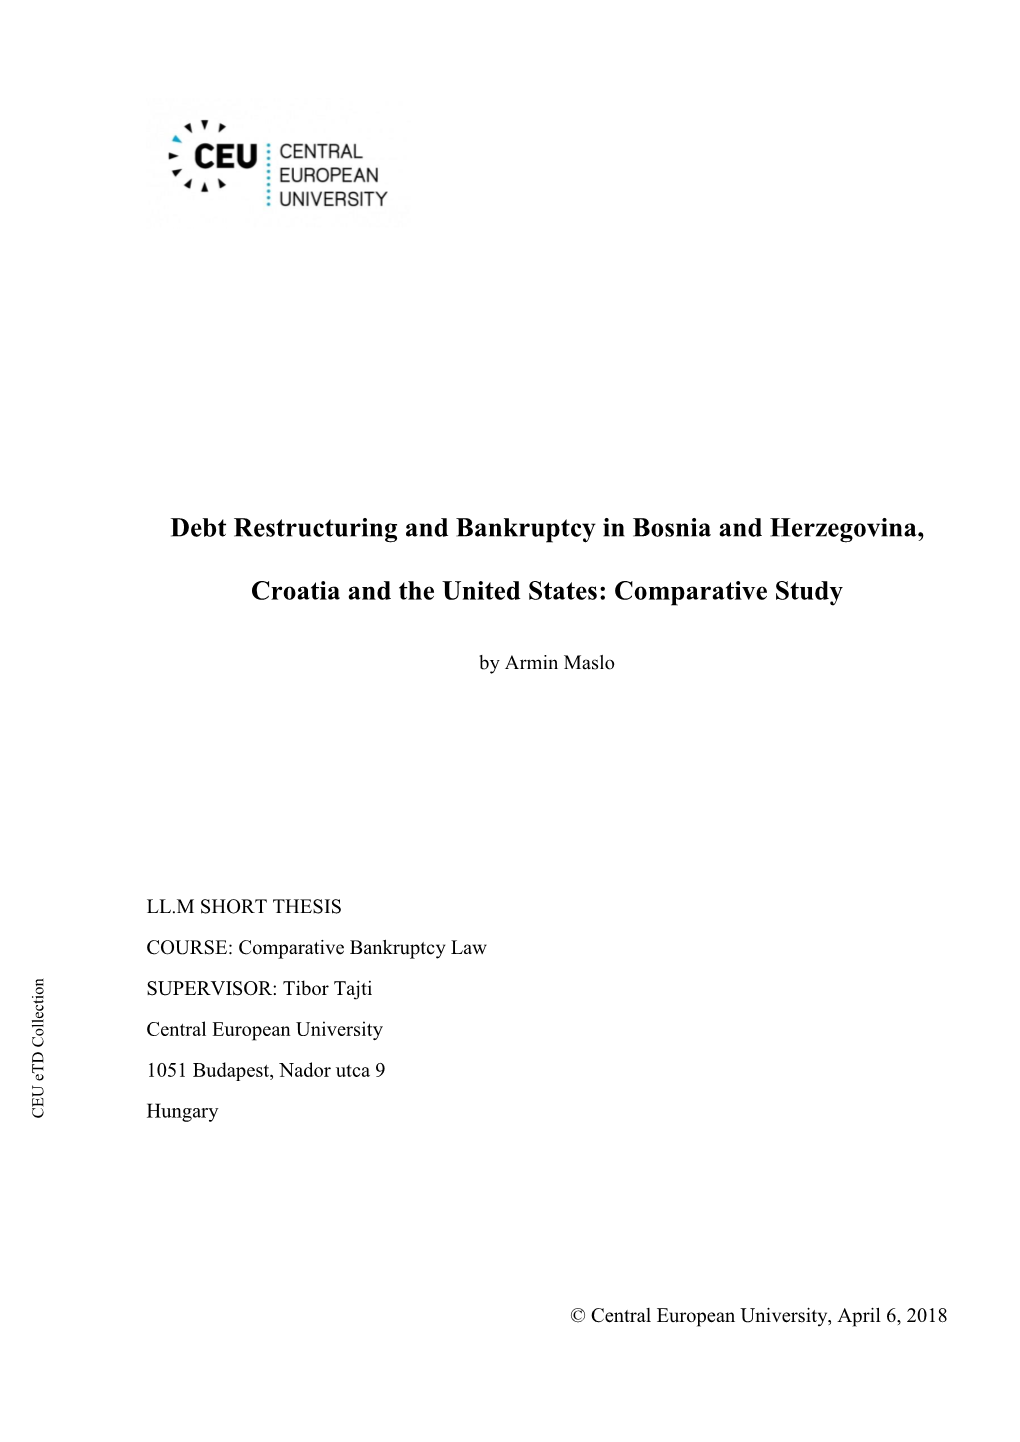 Debt Restructuring and Bankruptcy in Bosnia and Herzegovina, Croatia and the United States